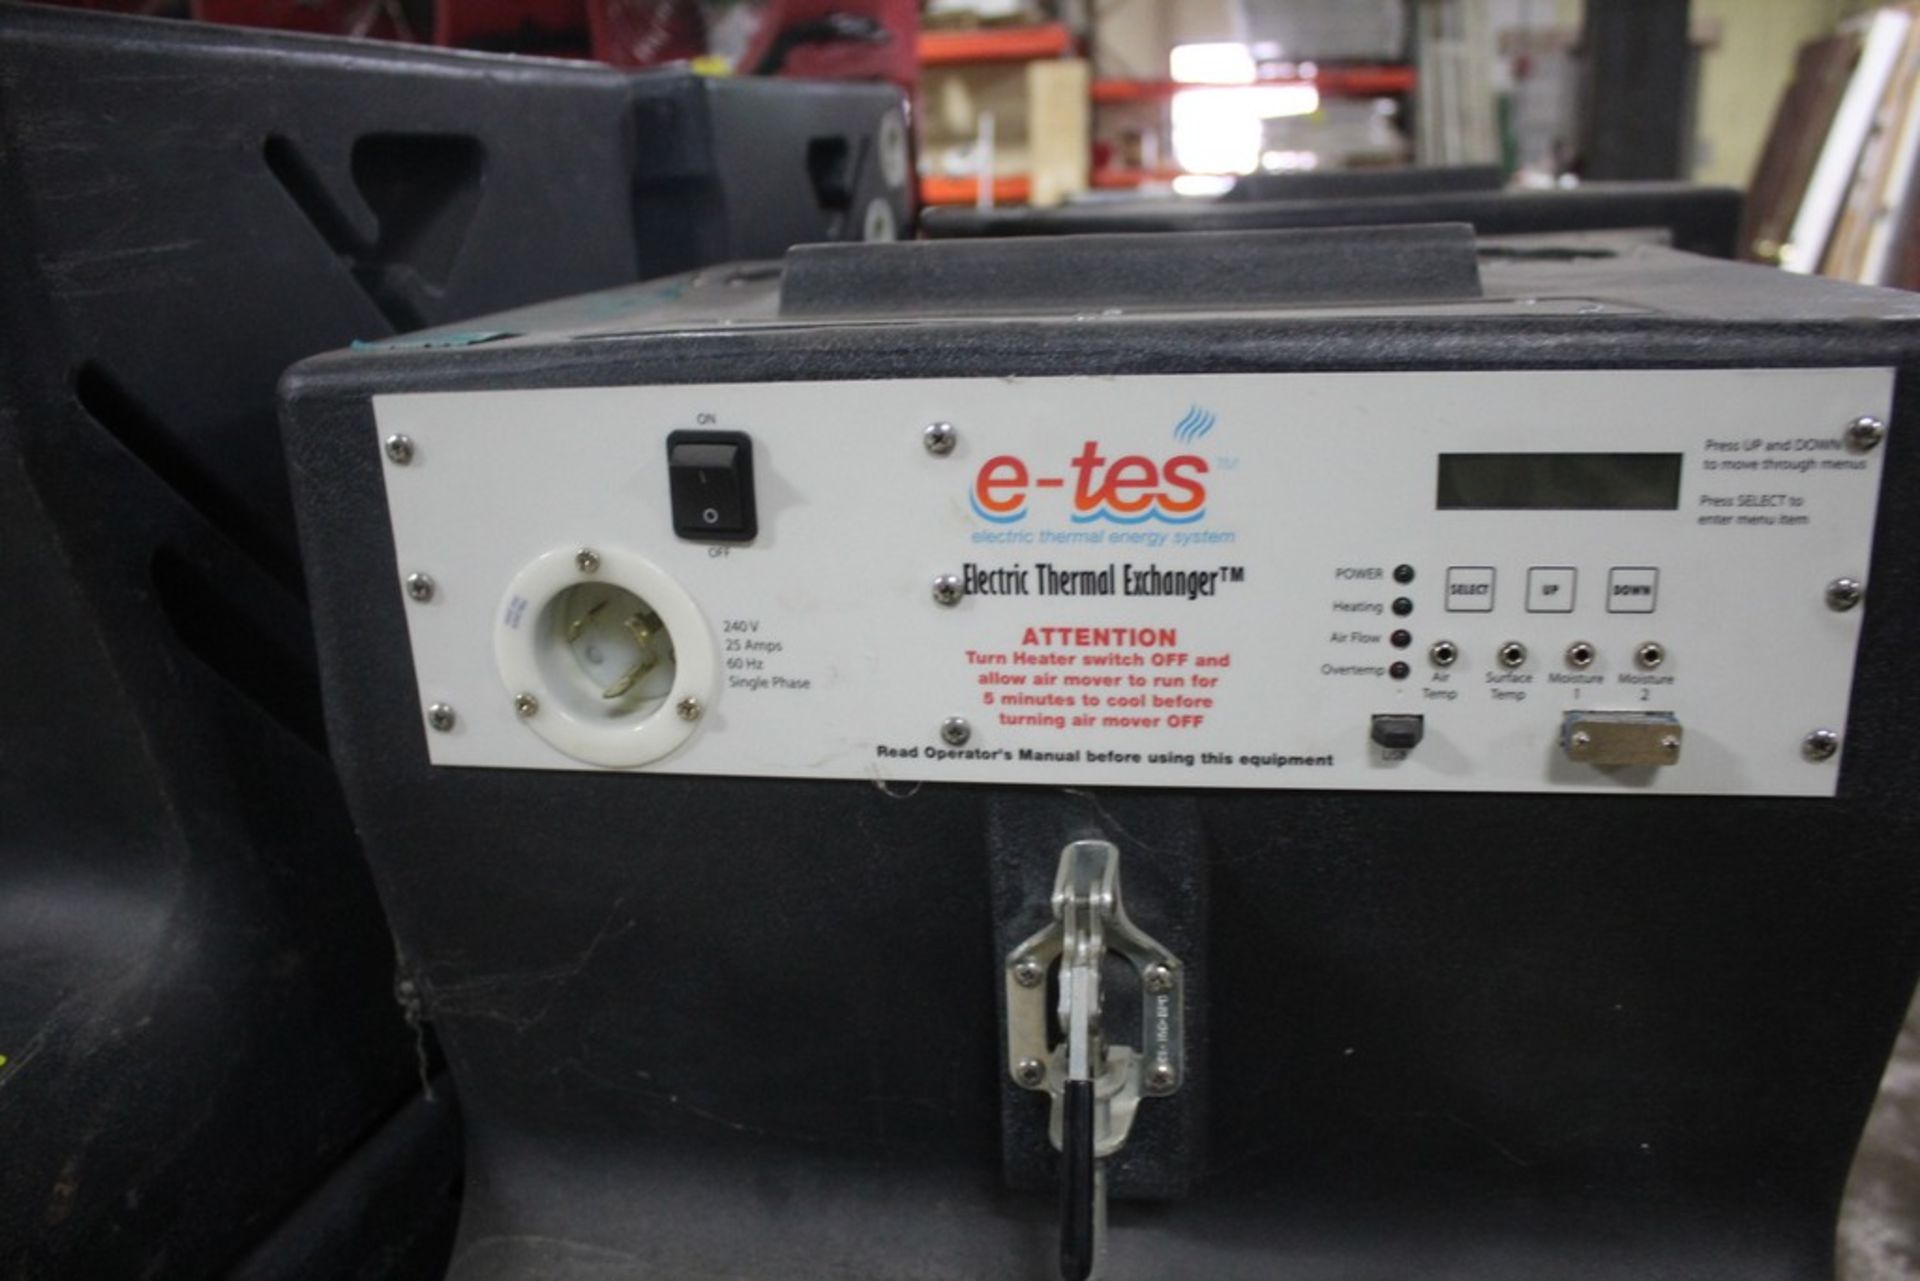 TES E-ETS ELECTRIC THERMAL EXCHANGER - 120 V - Image 2 of 2